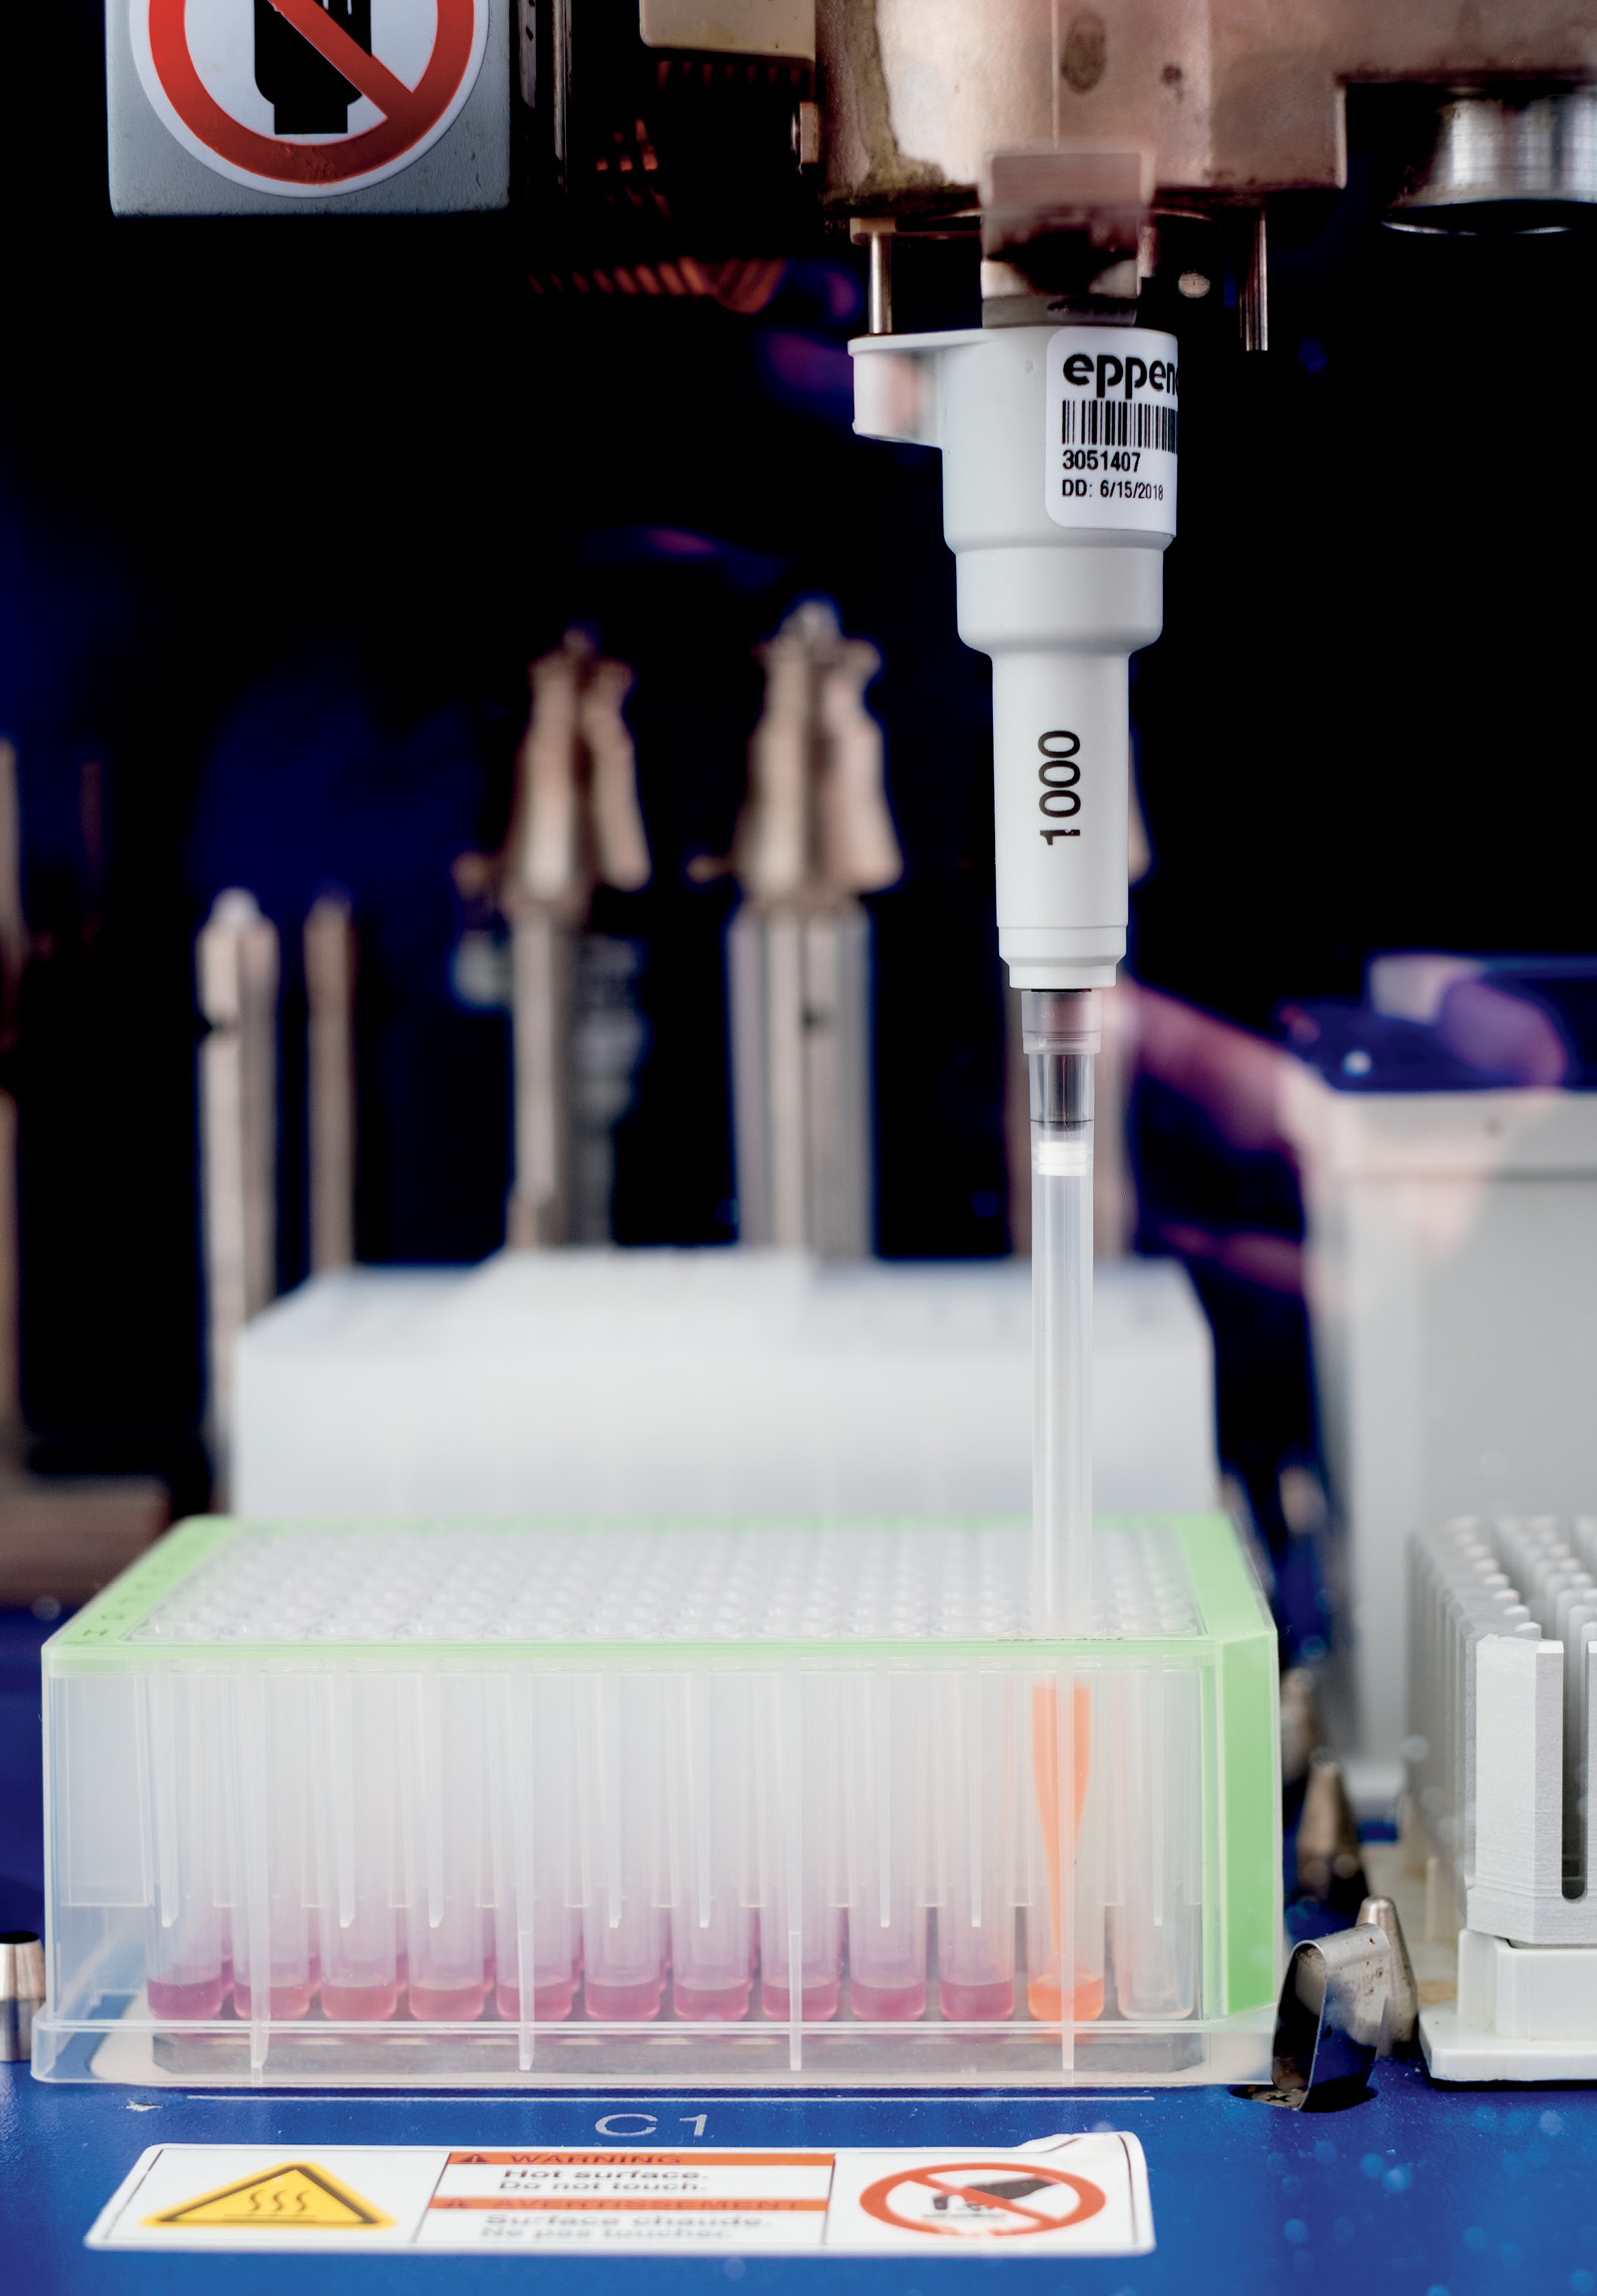 A robotic system used to process blood samples.